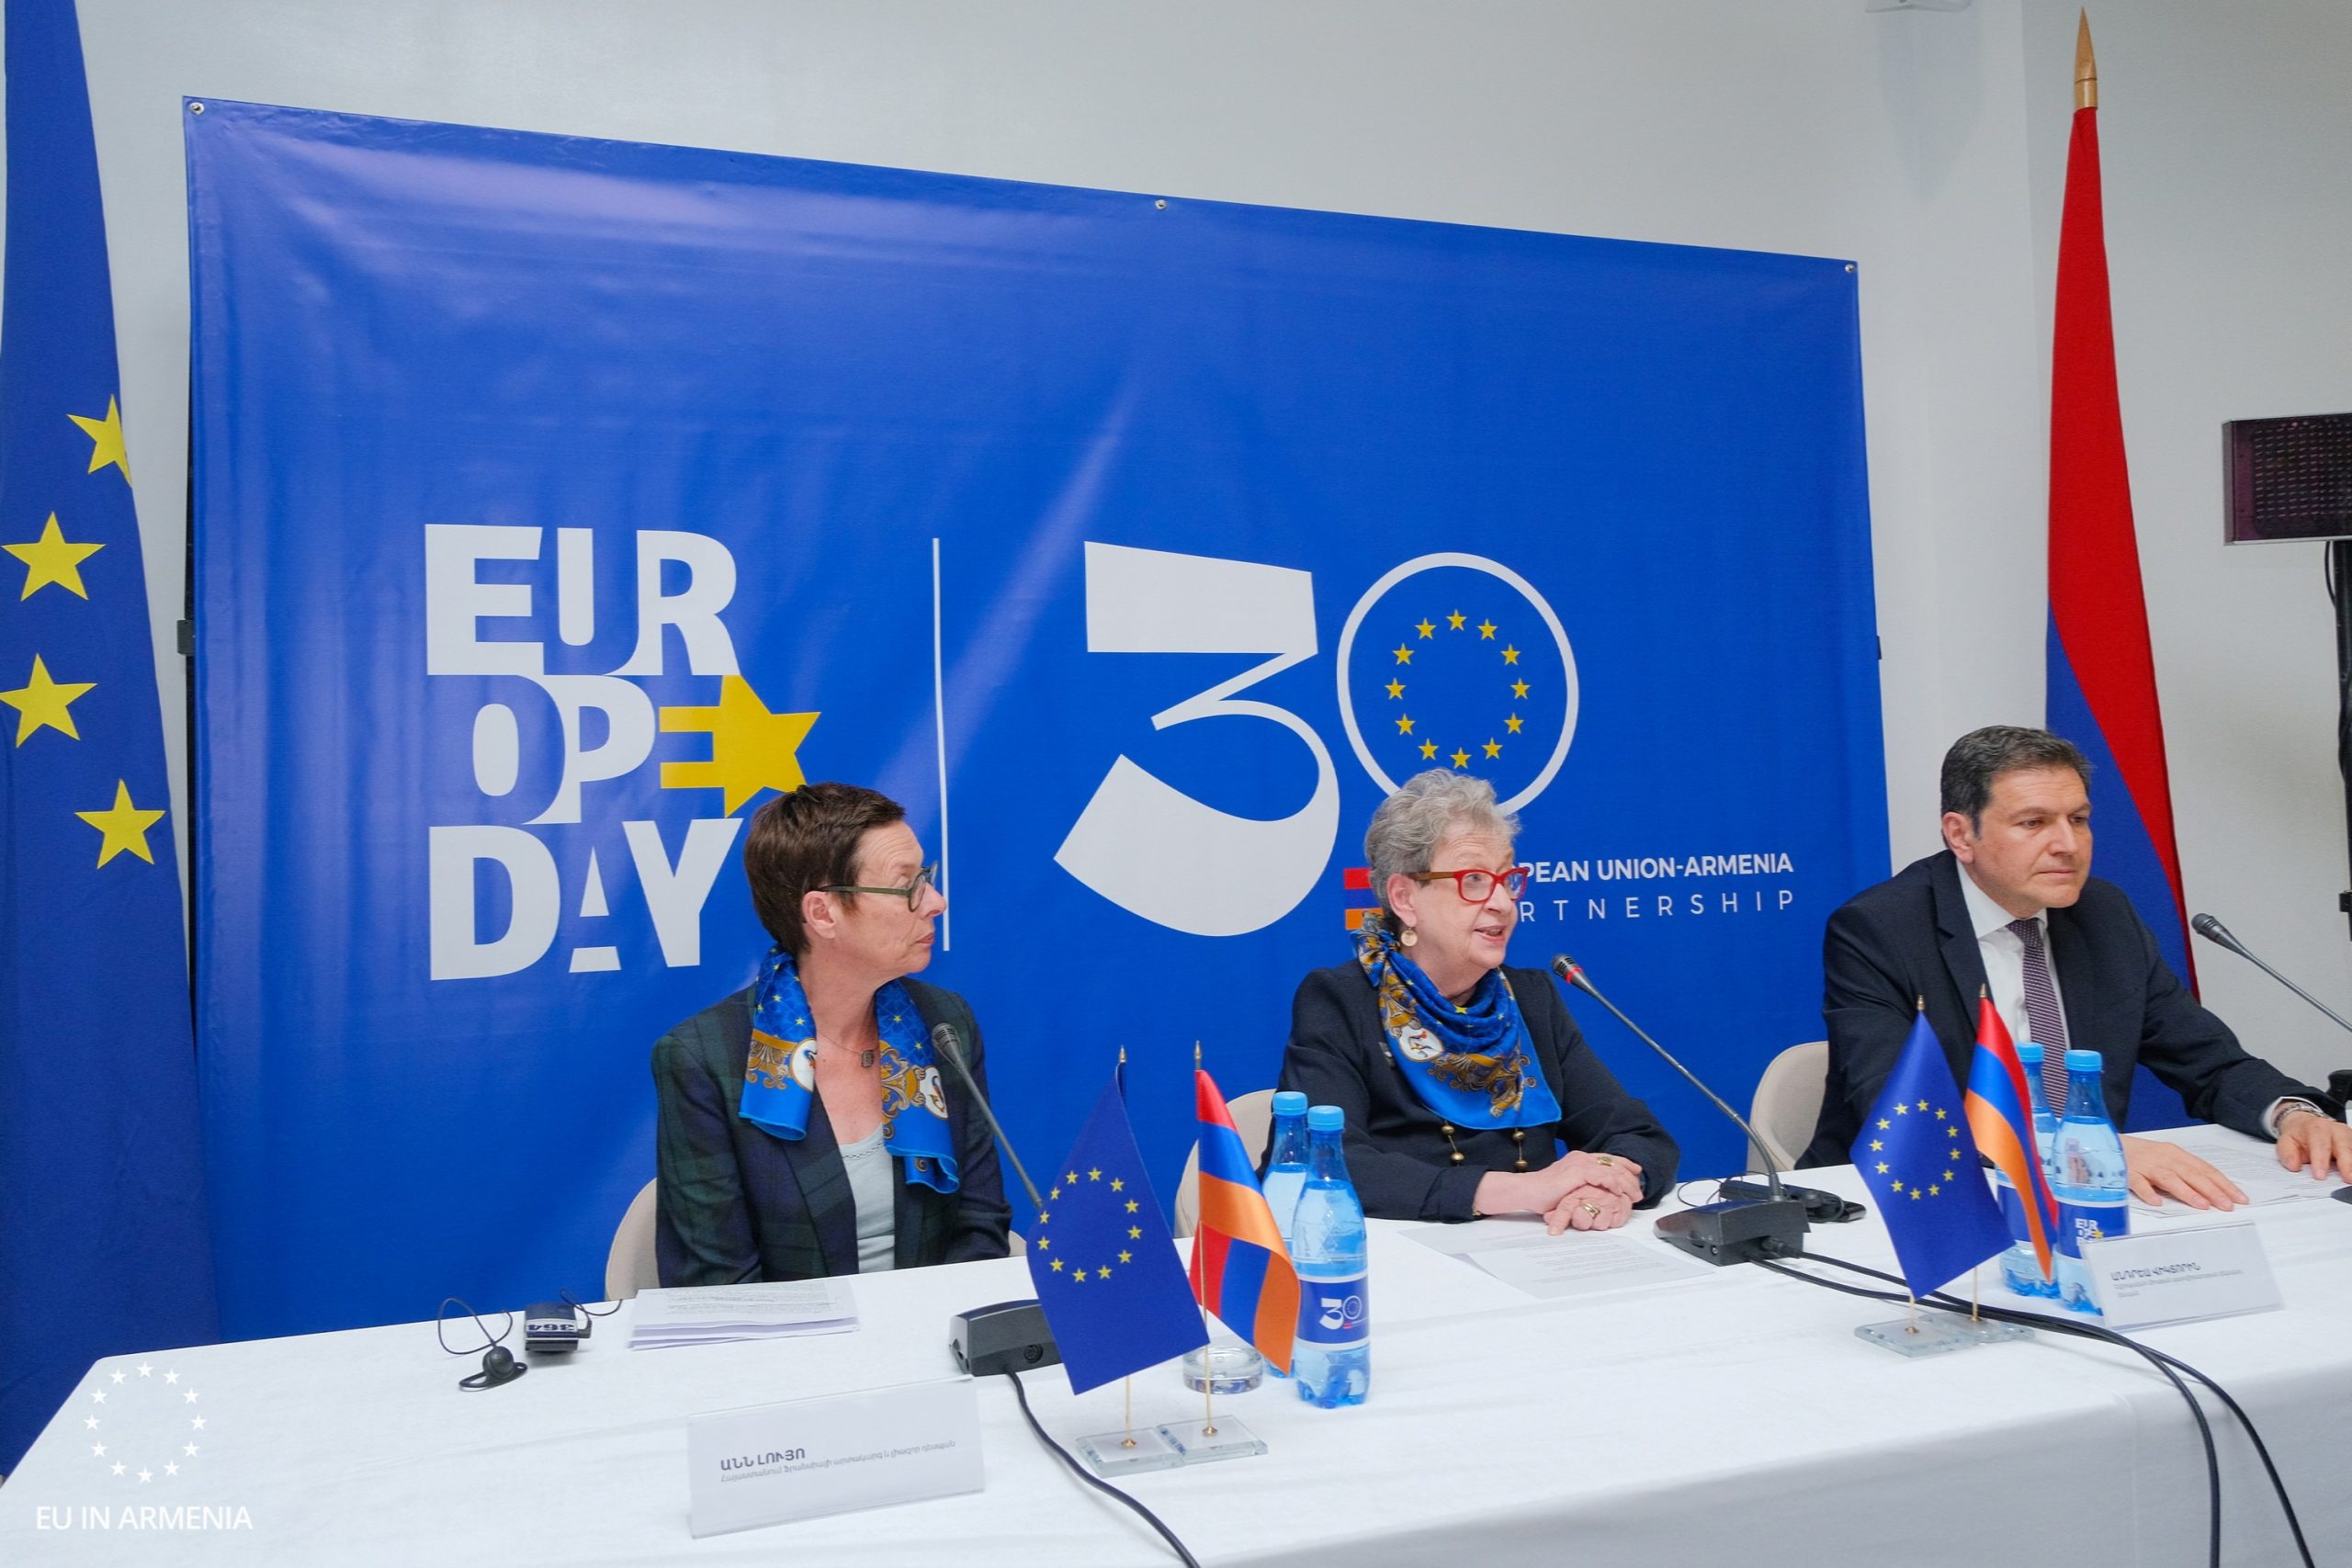 EU, French ambassadors reiterate commitment to development and peace in Armenia